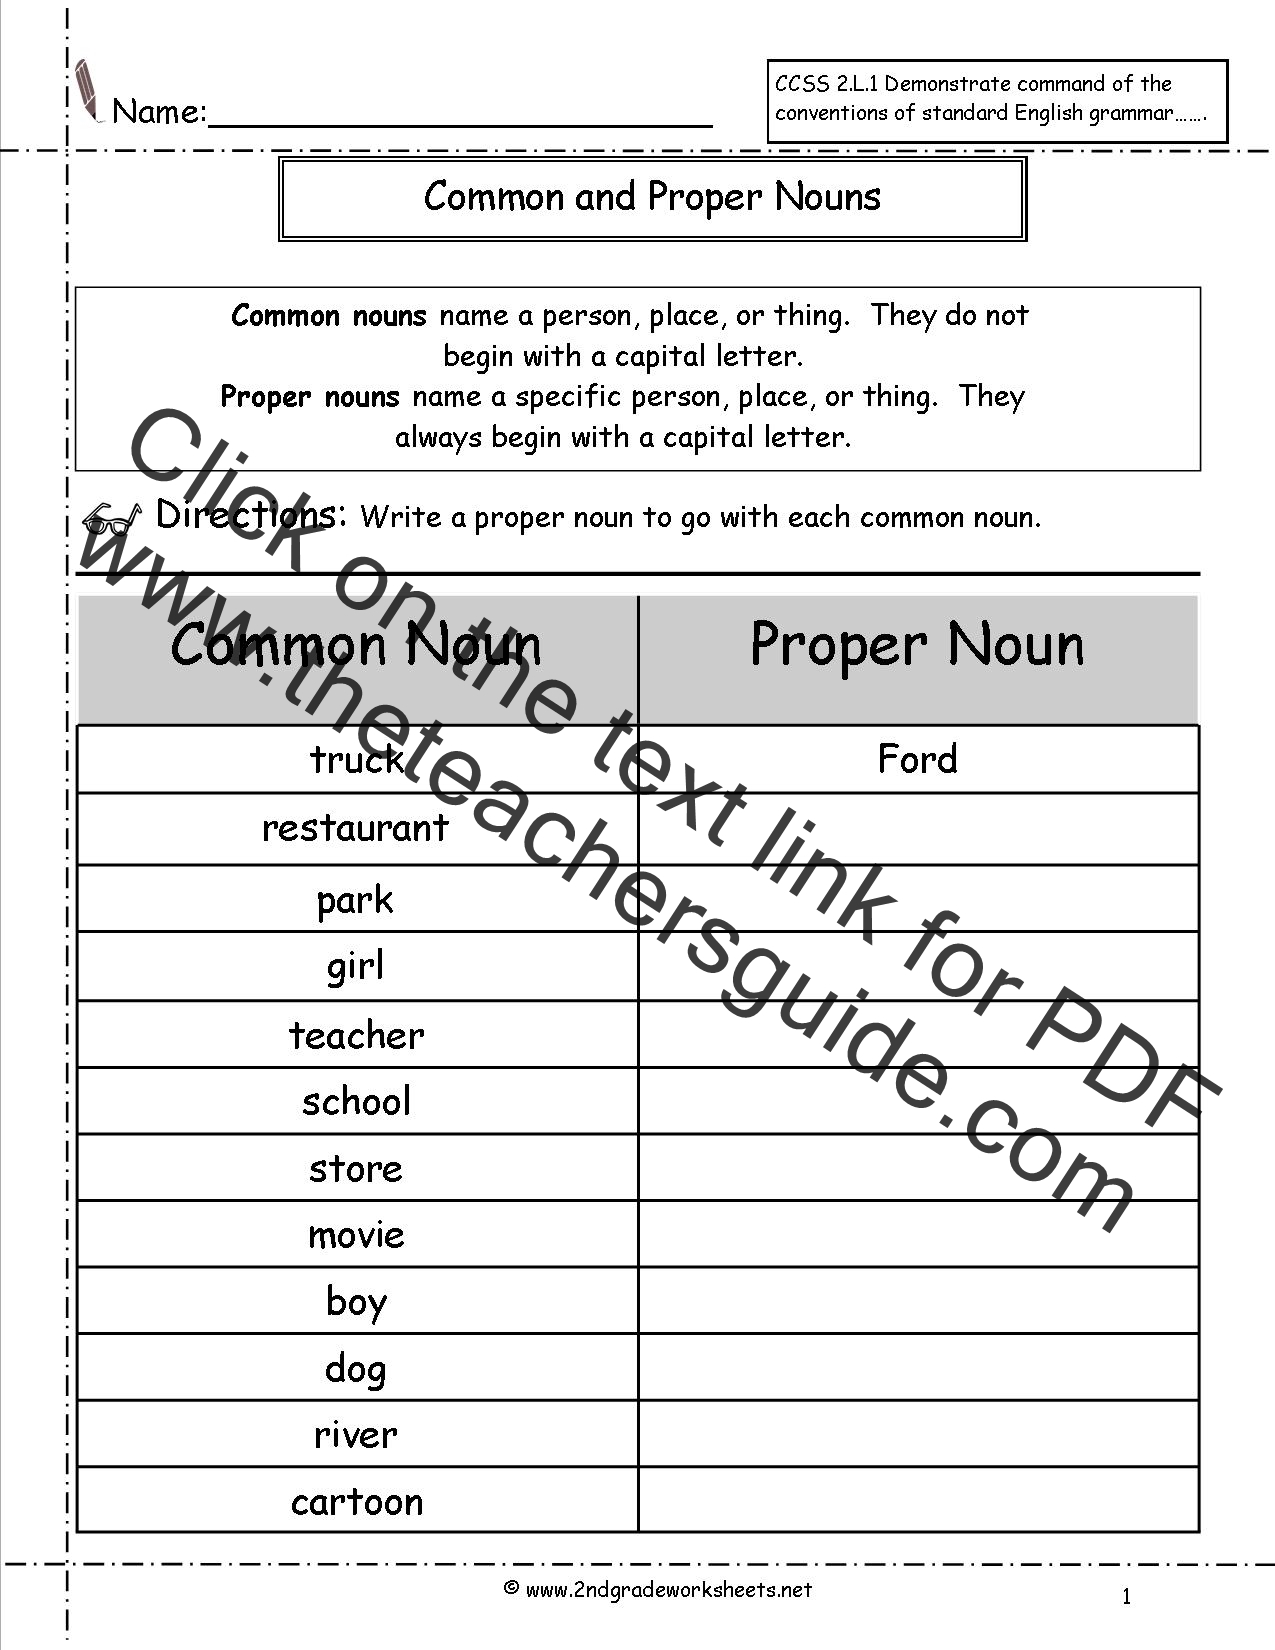 Common and Proper Nouns Worksheet With Proper Nouns Worksheet 2nd Grade